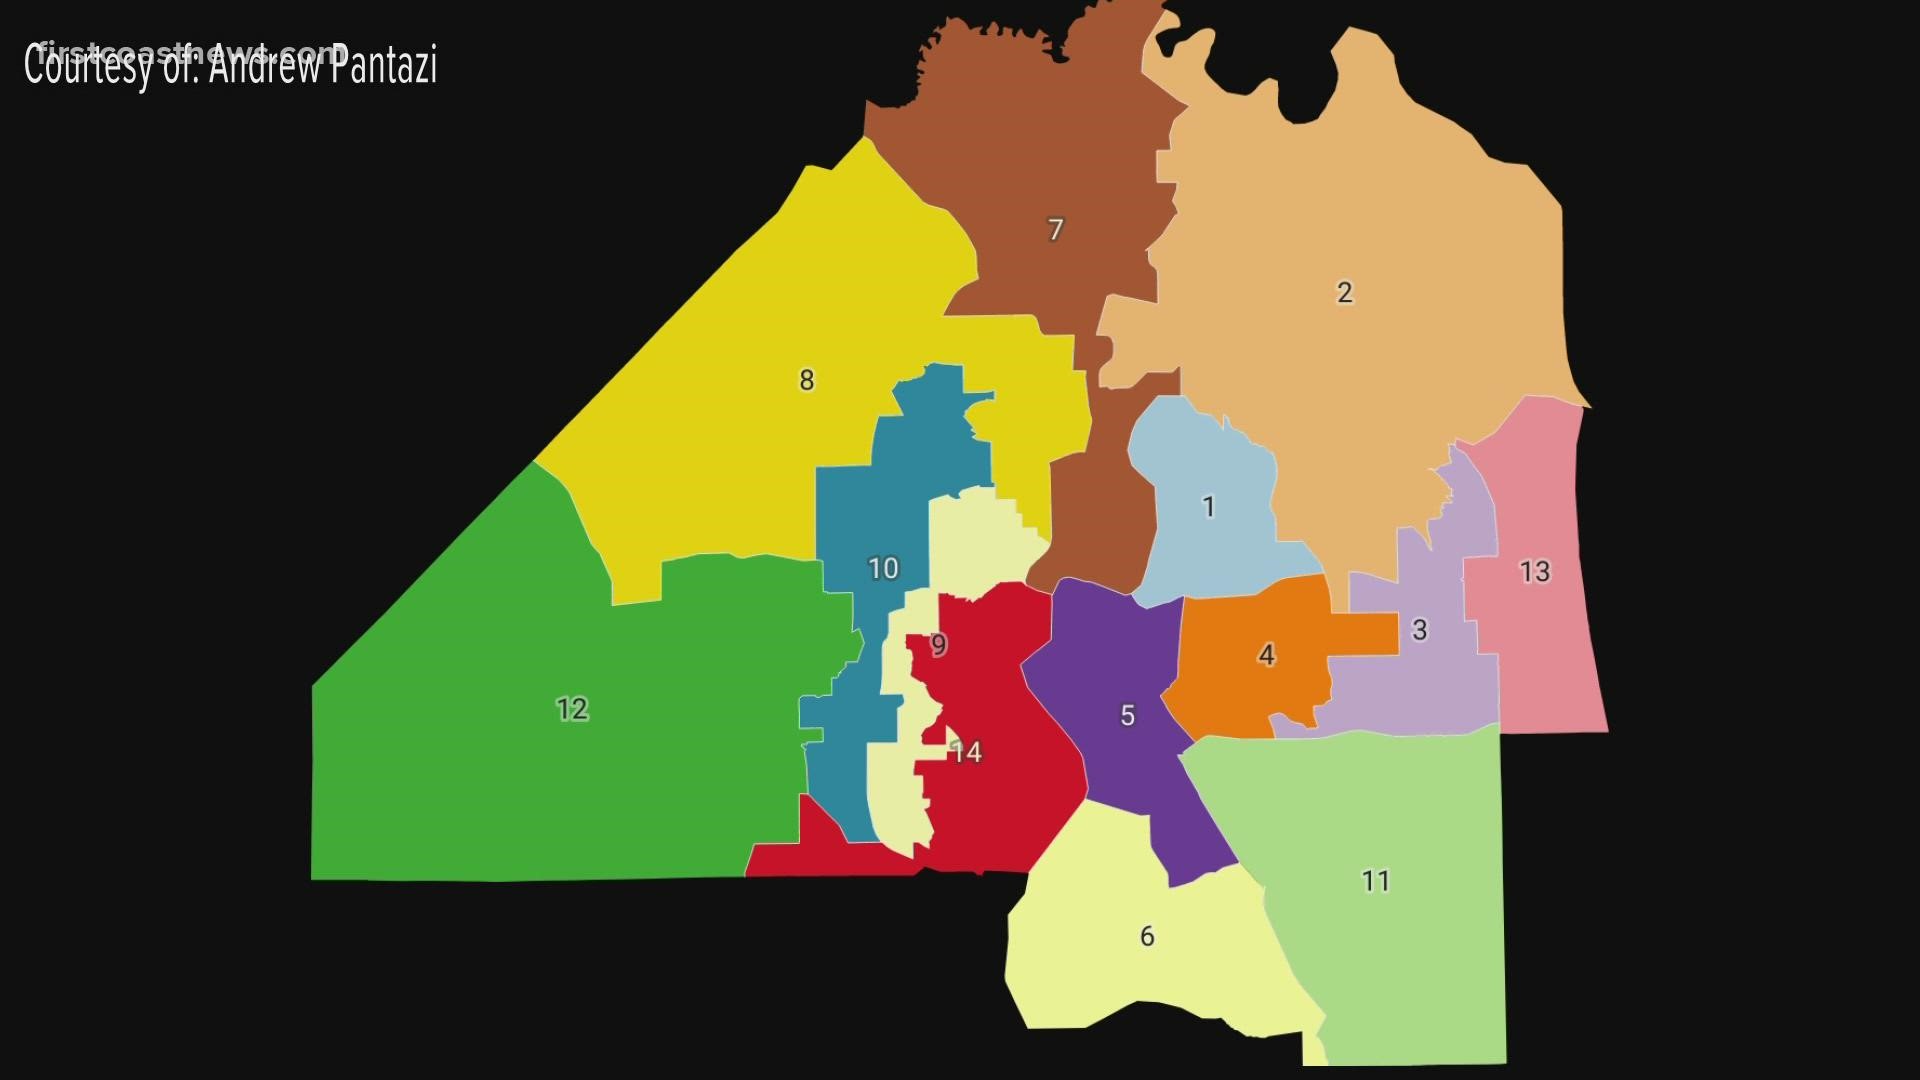 Despite a lawsuit threat from a civil rights group. The Jacksonville city council approved a new district map last night.